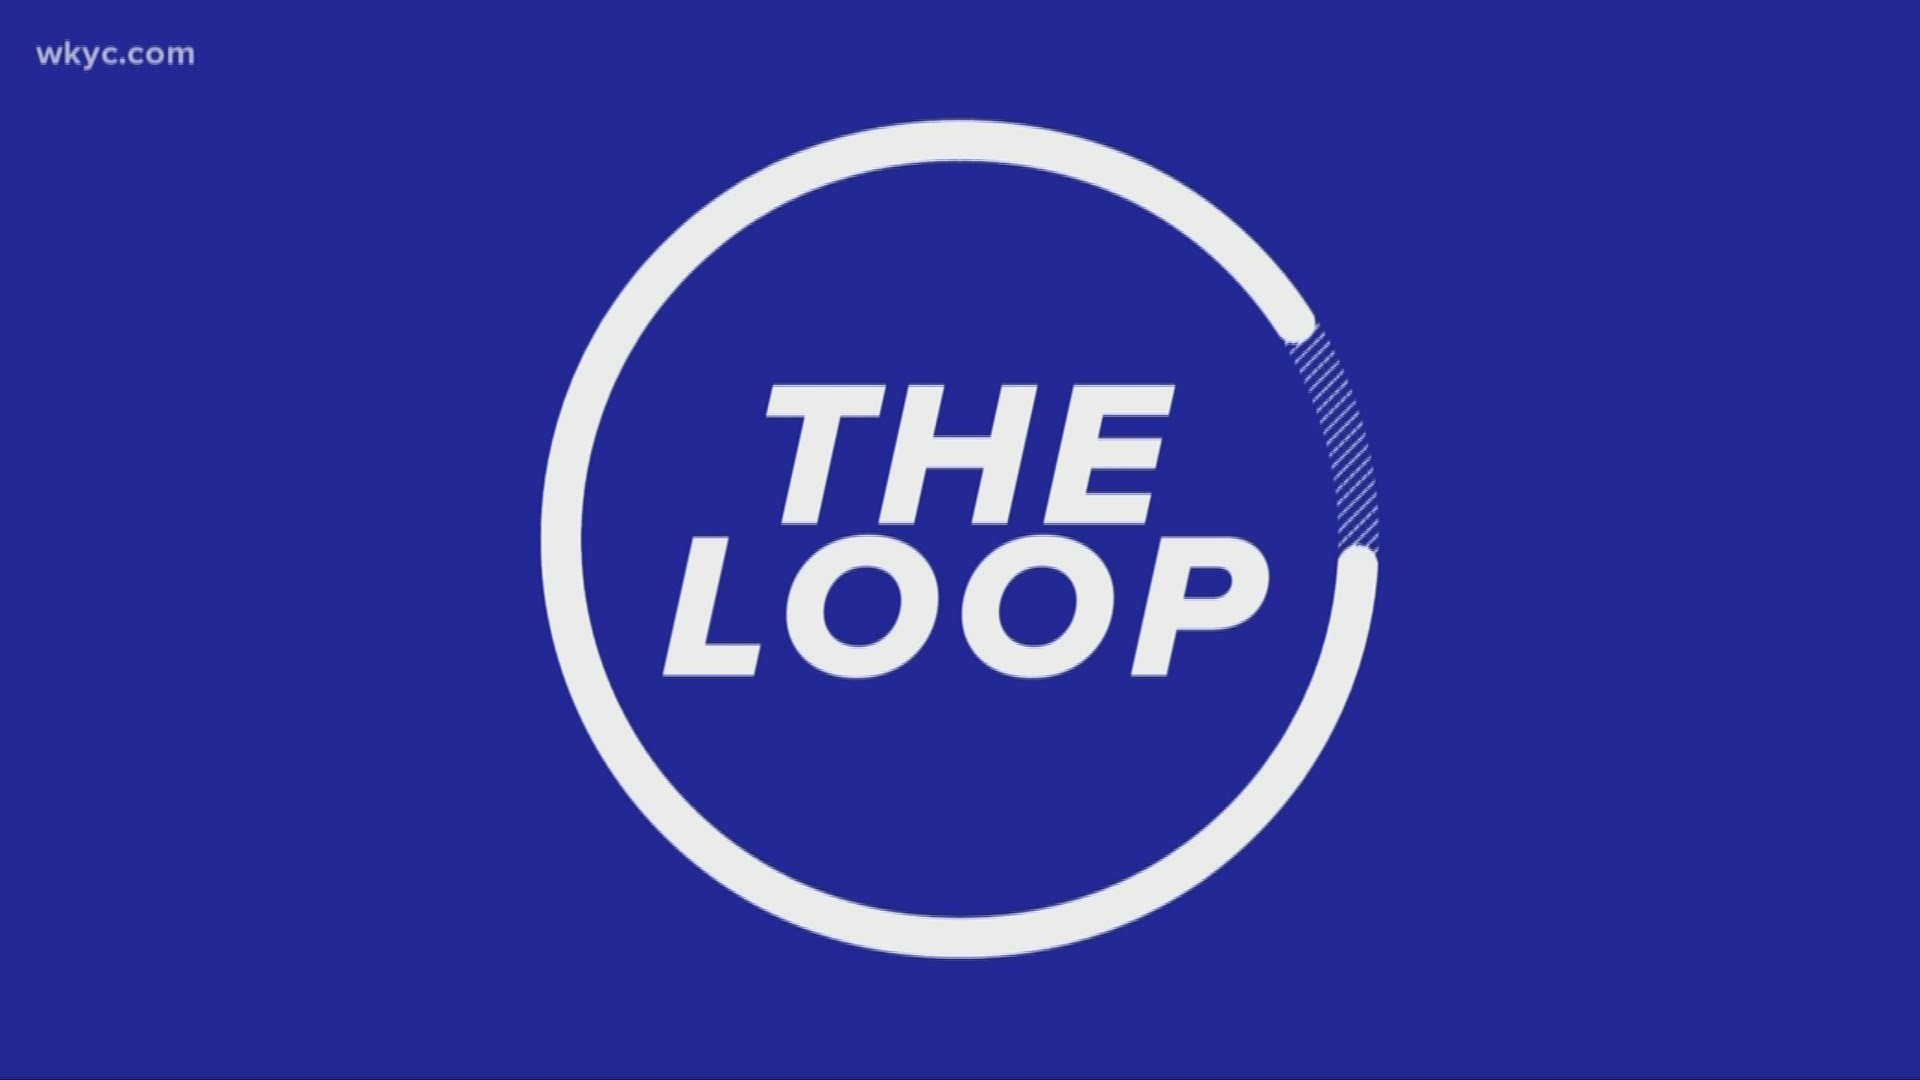 The internet giant is taking on a new endeavor. Betsy Kling has that and more in tonight's Loop.